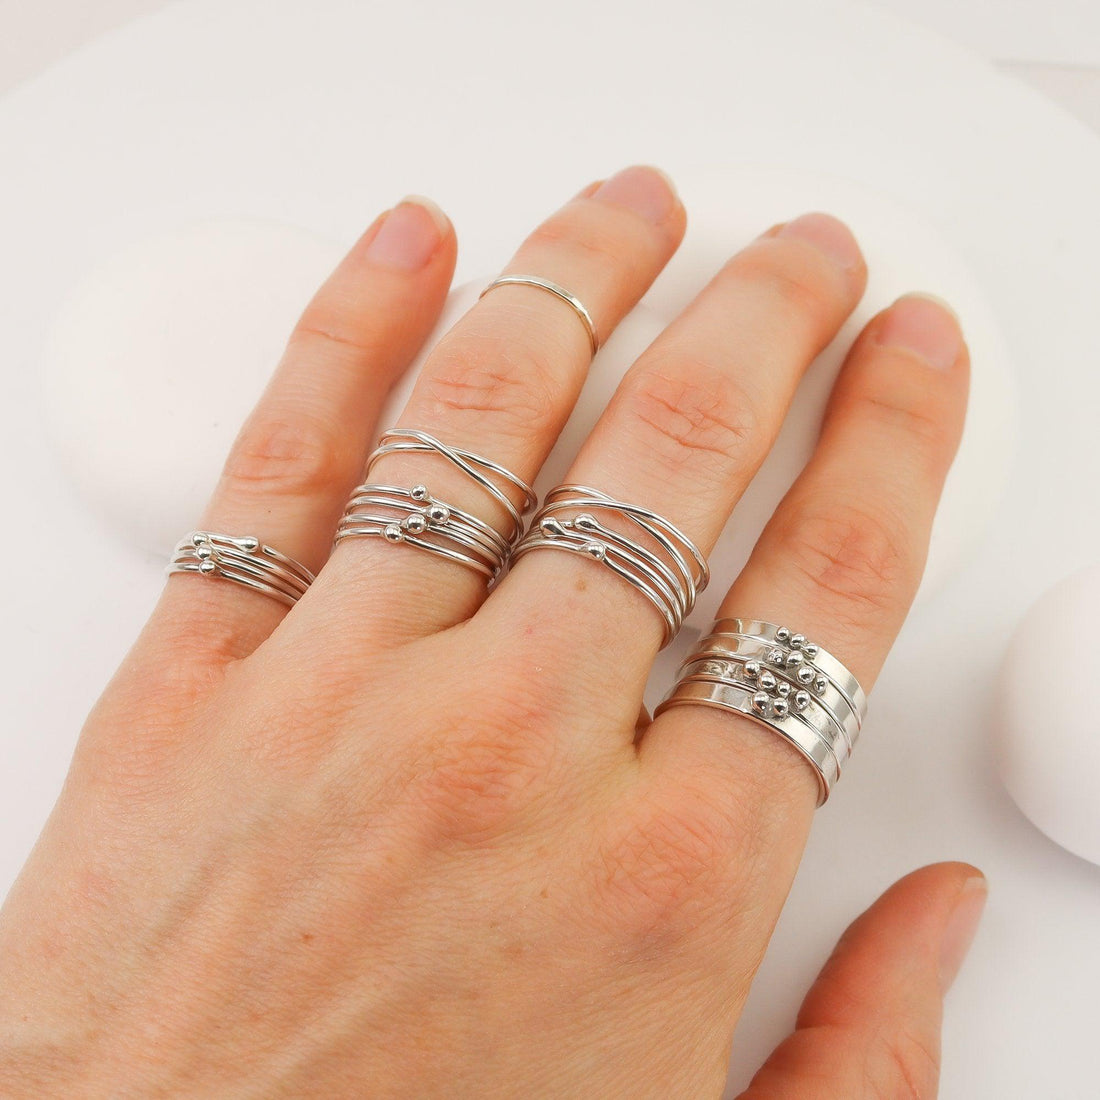 Tiny Silver Stacking Rings